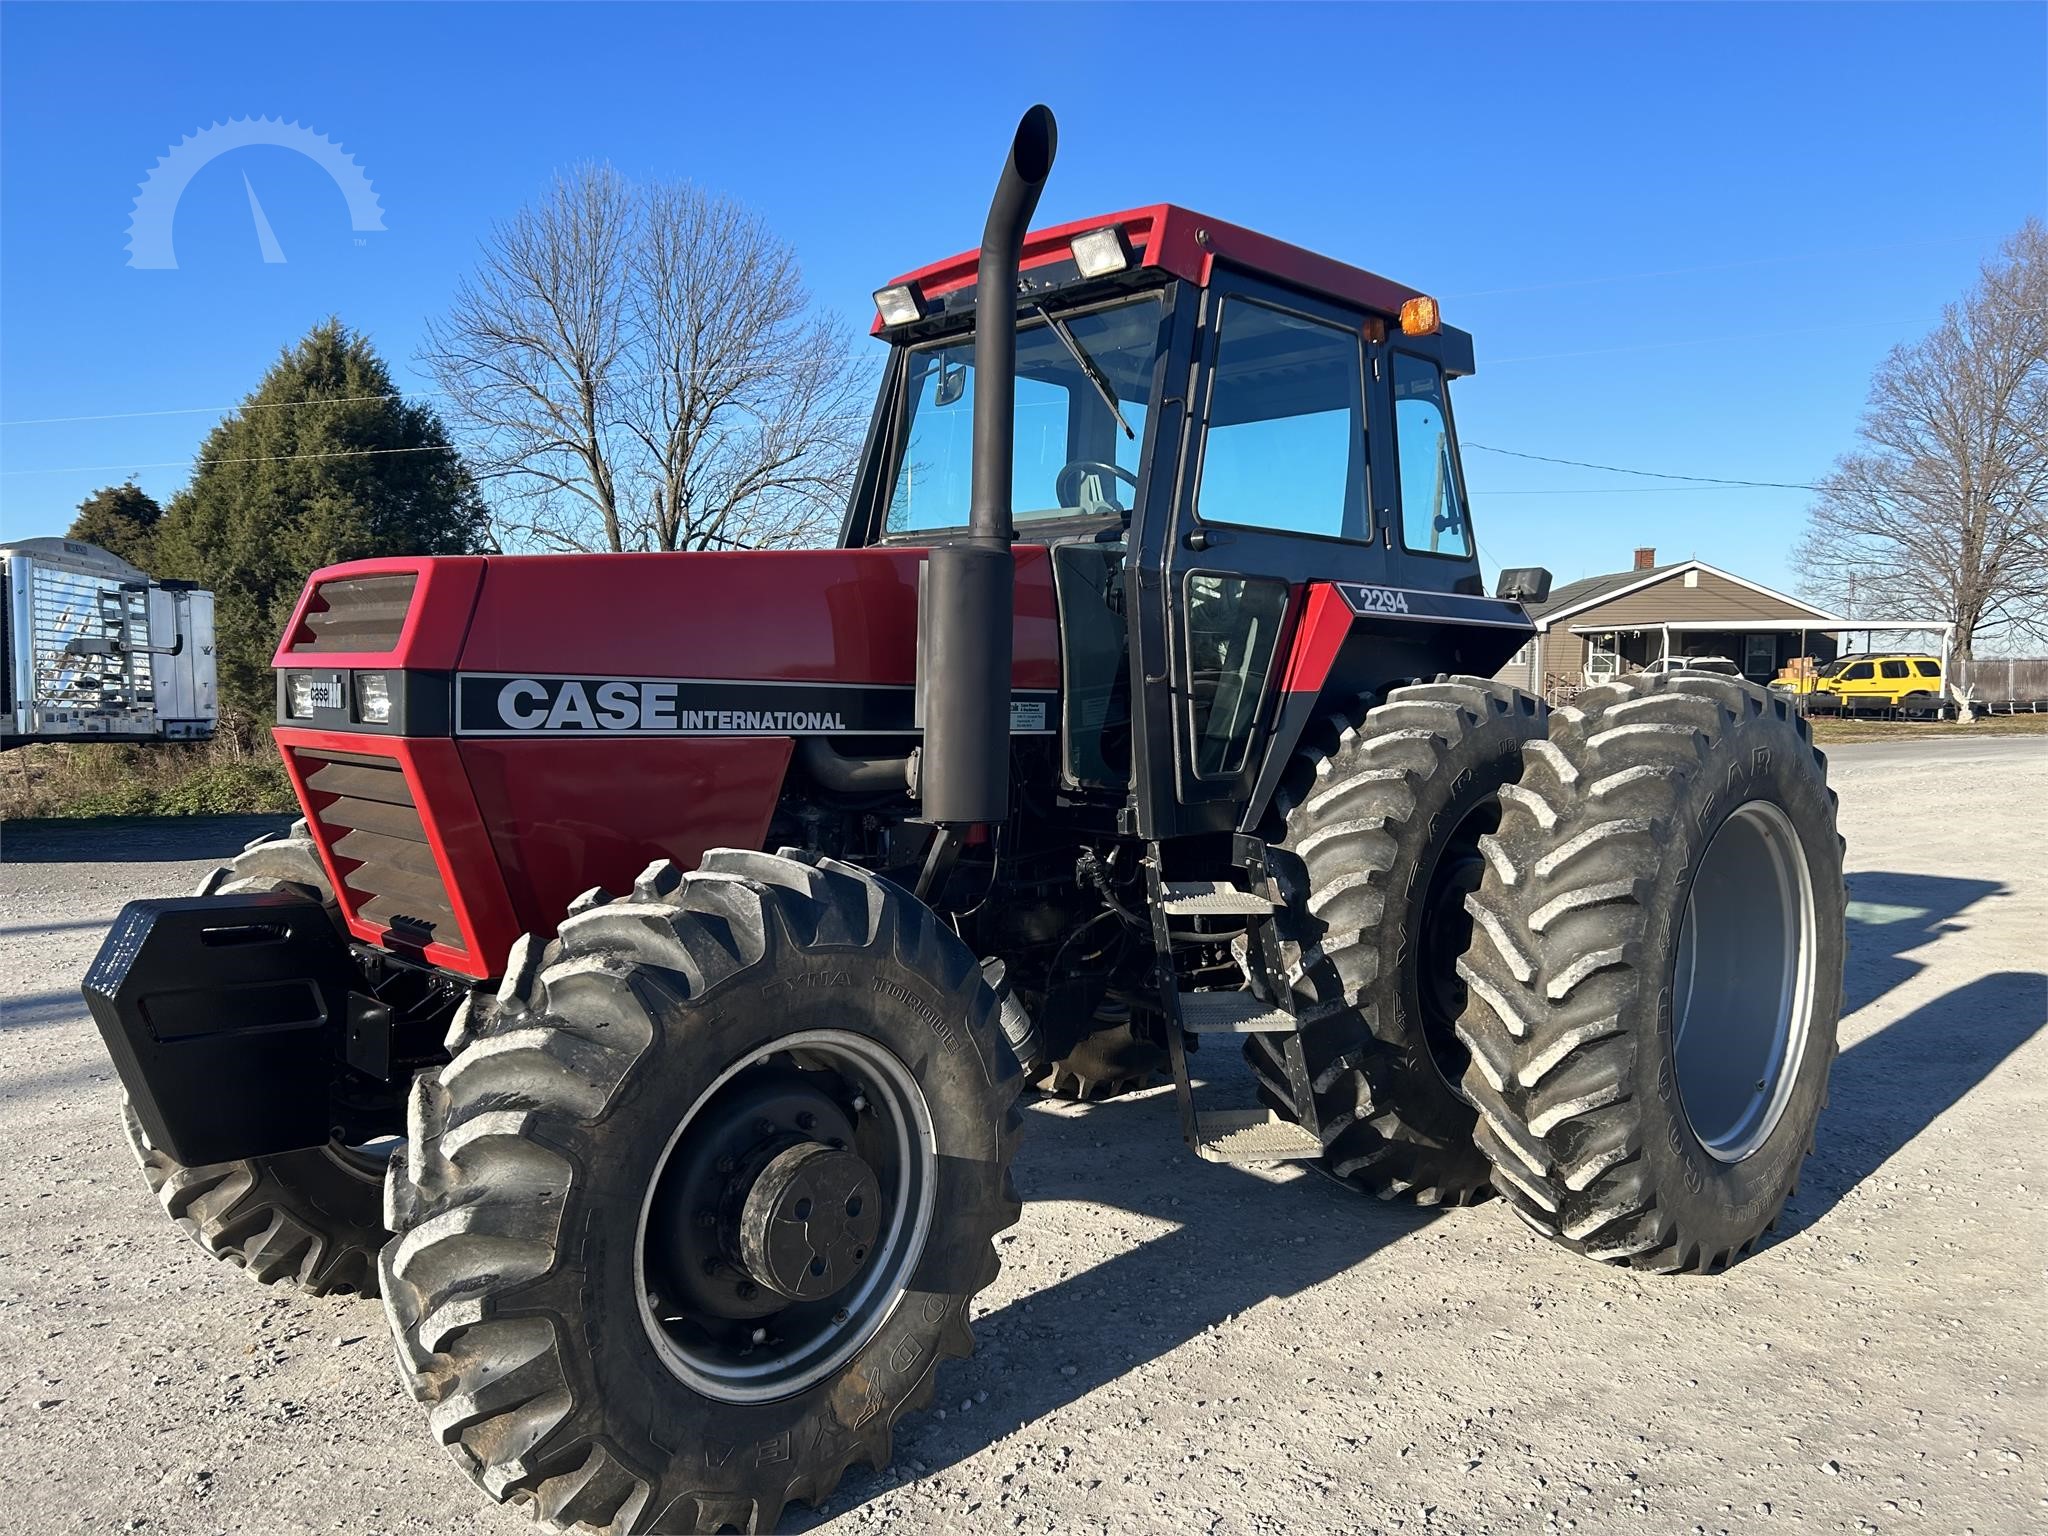 2294 case tractor for sale